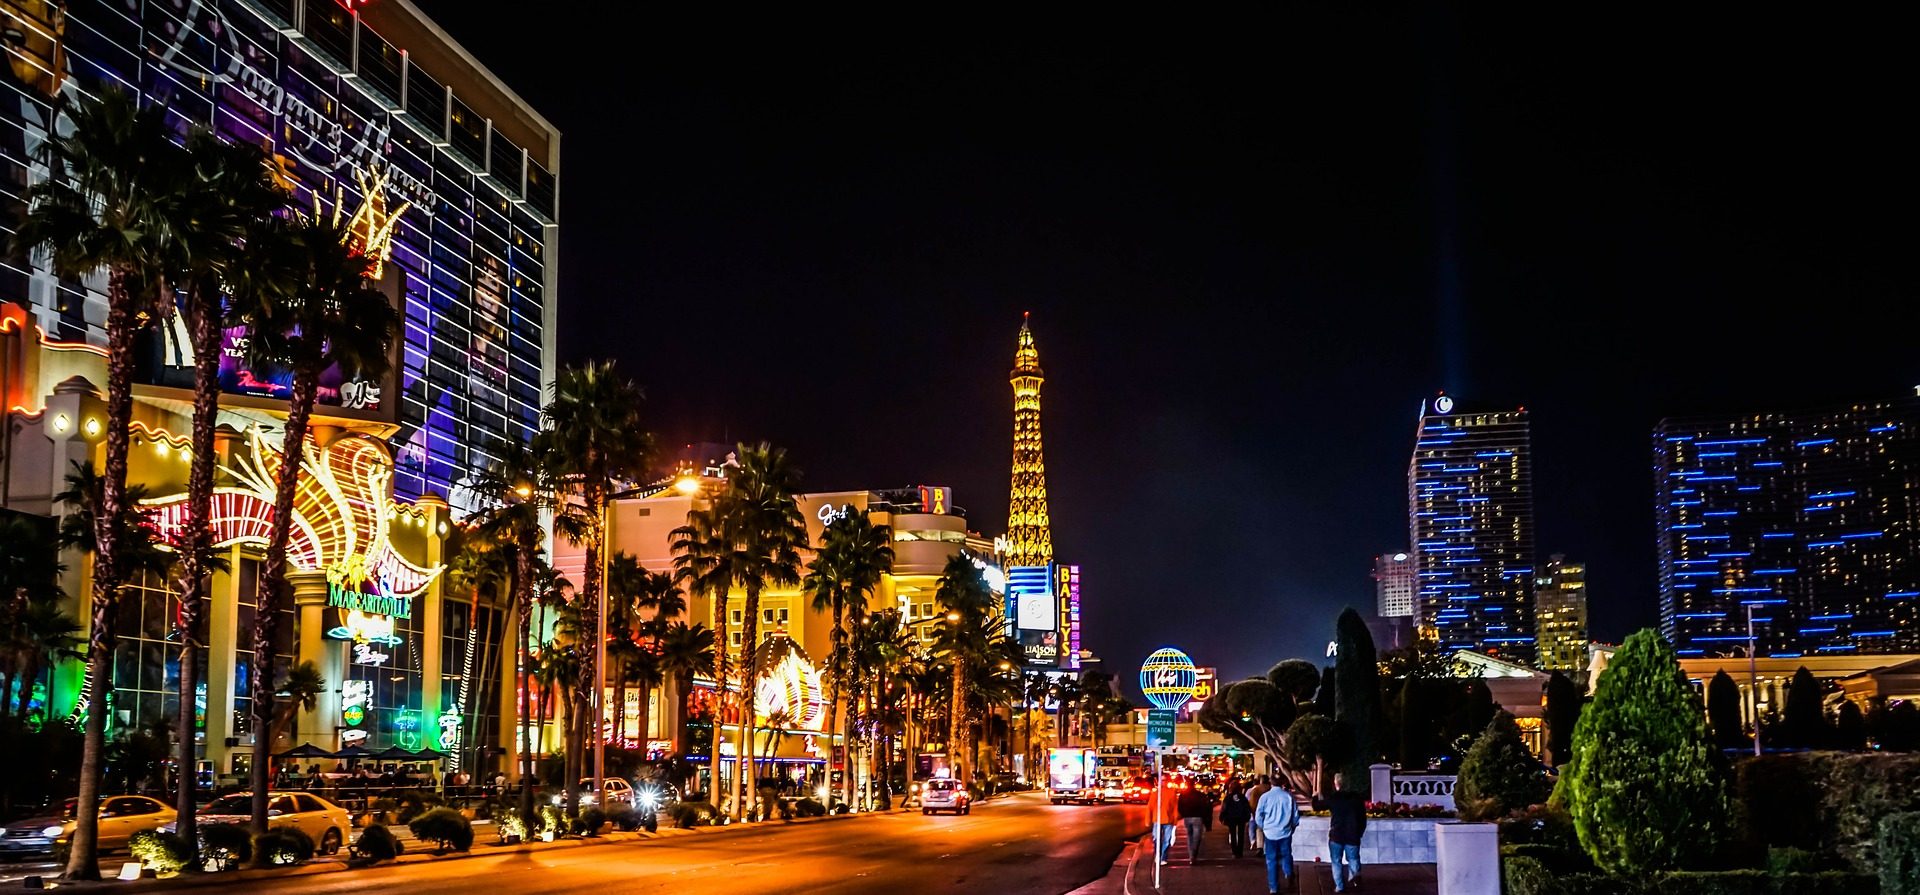 las vegas 573600 1920 5 Of The Best US Destinations To Travel To On A Budget